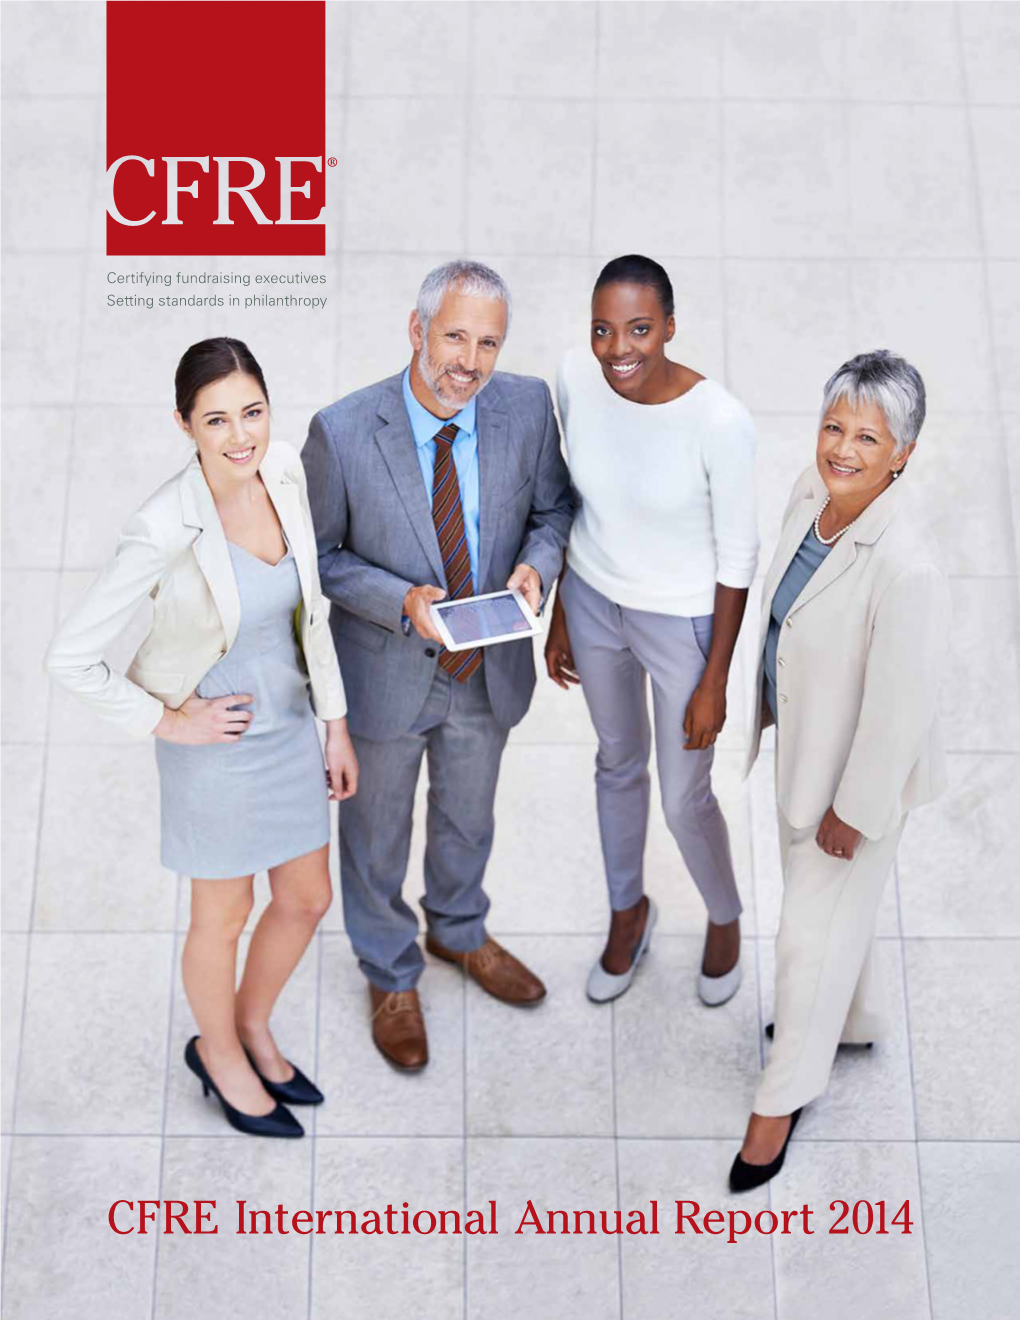 CFRE International Annual Report 2014 from the Chair